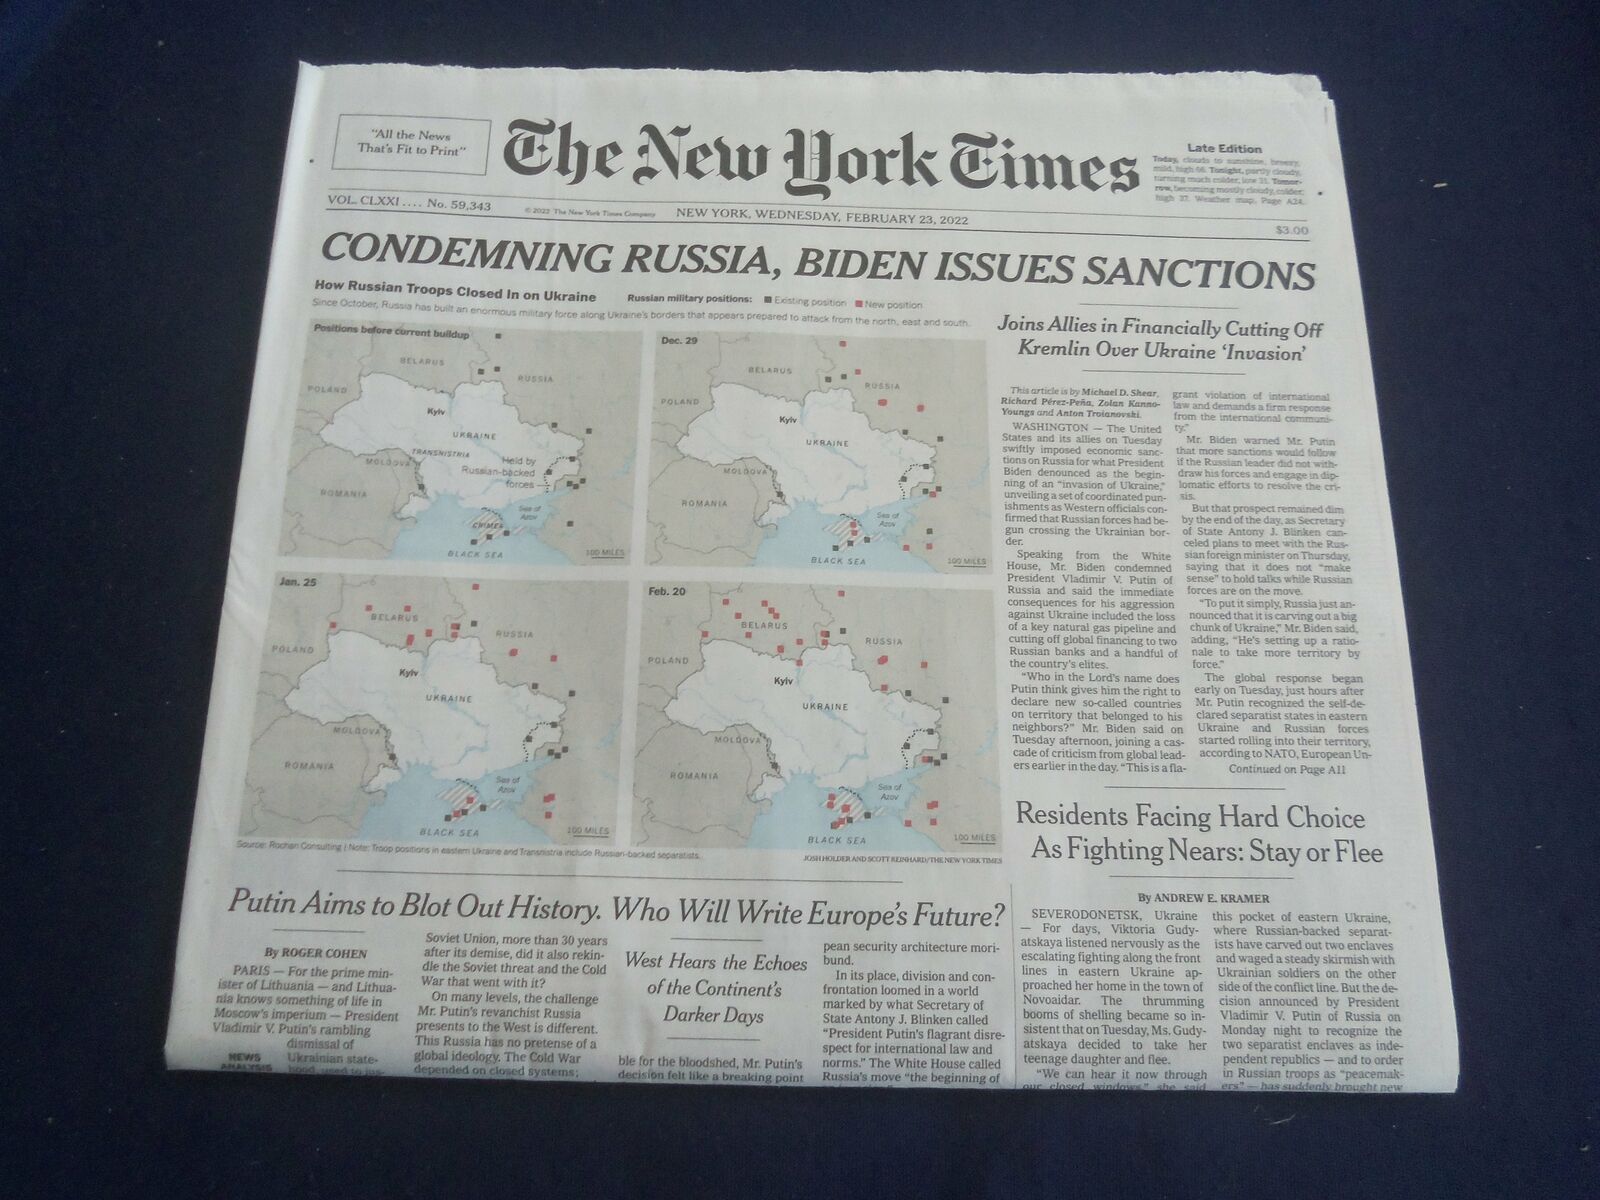 2022 FEBRUARY 23 NEW YORK TIMES - CONDEMING RUSSIA, BIDEN ISSUES SANCTIONS